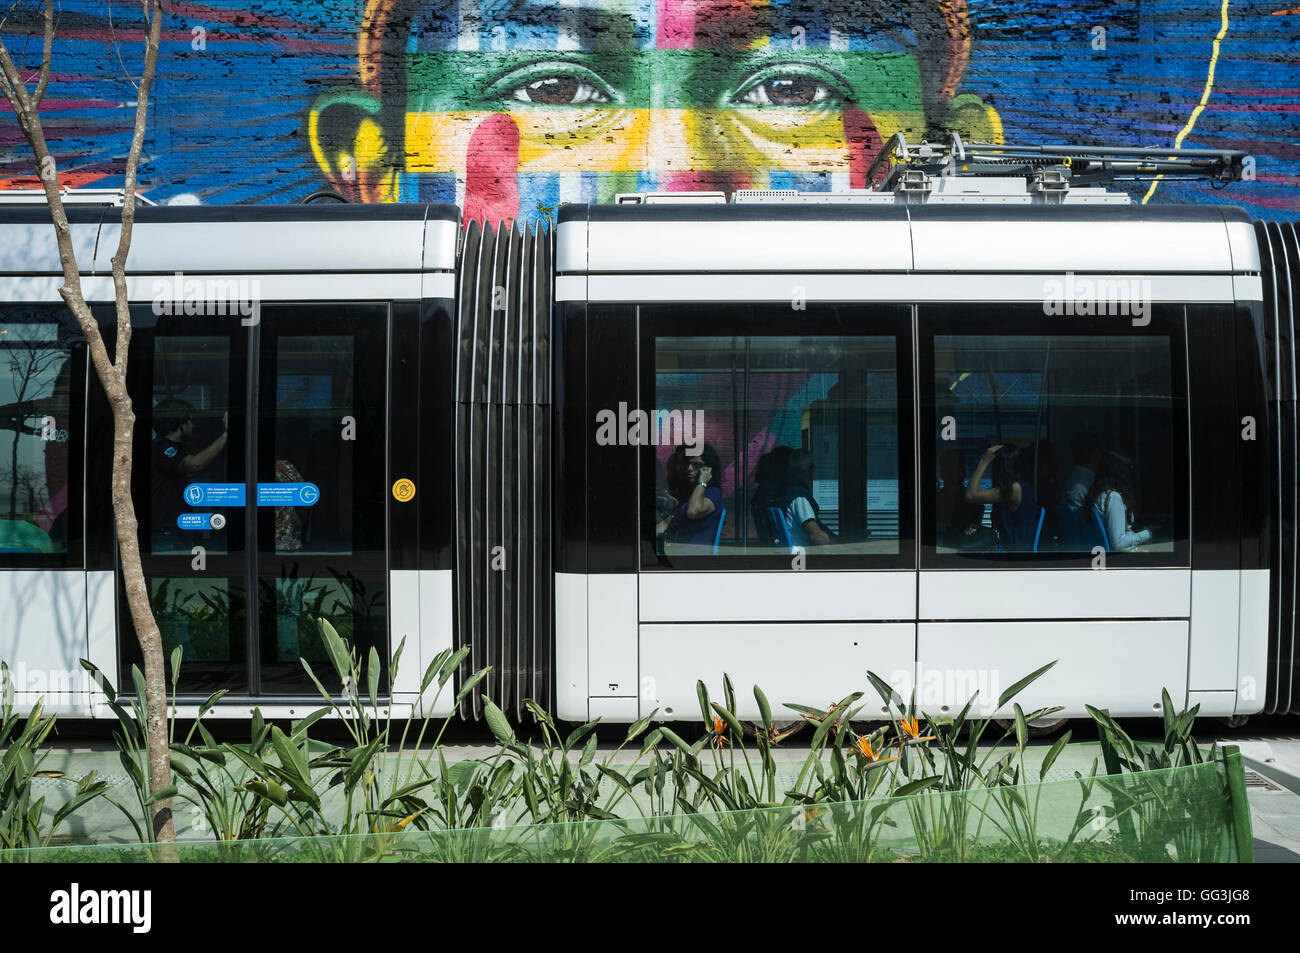 Rio de Janeiro Light Rail ( Portuguese - VLT do Rio de Janeiro or VLT Carioca ), a light rail system opened in June 2016 ahead of the 2016 Olympic Games passes in front of Eduardo Kobra s Mural named Native people from the 5 continents ( Povos nativos dos 5 continentes ) at Boulevard do Porto in Rio de Janeiro port surrounding area, Brazil, part of the Porto Maravilha Project ( Marvelous Port Program ), a revitalization project of the city Port Zone. Kobra is a Brazilian street artist notable for painting large murals, usually depicting portraits with a technique of repeating squares and trian Stock Photo